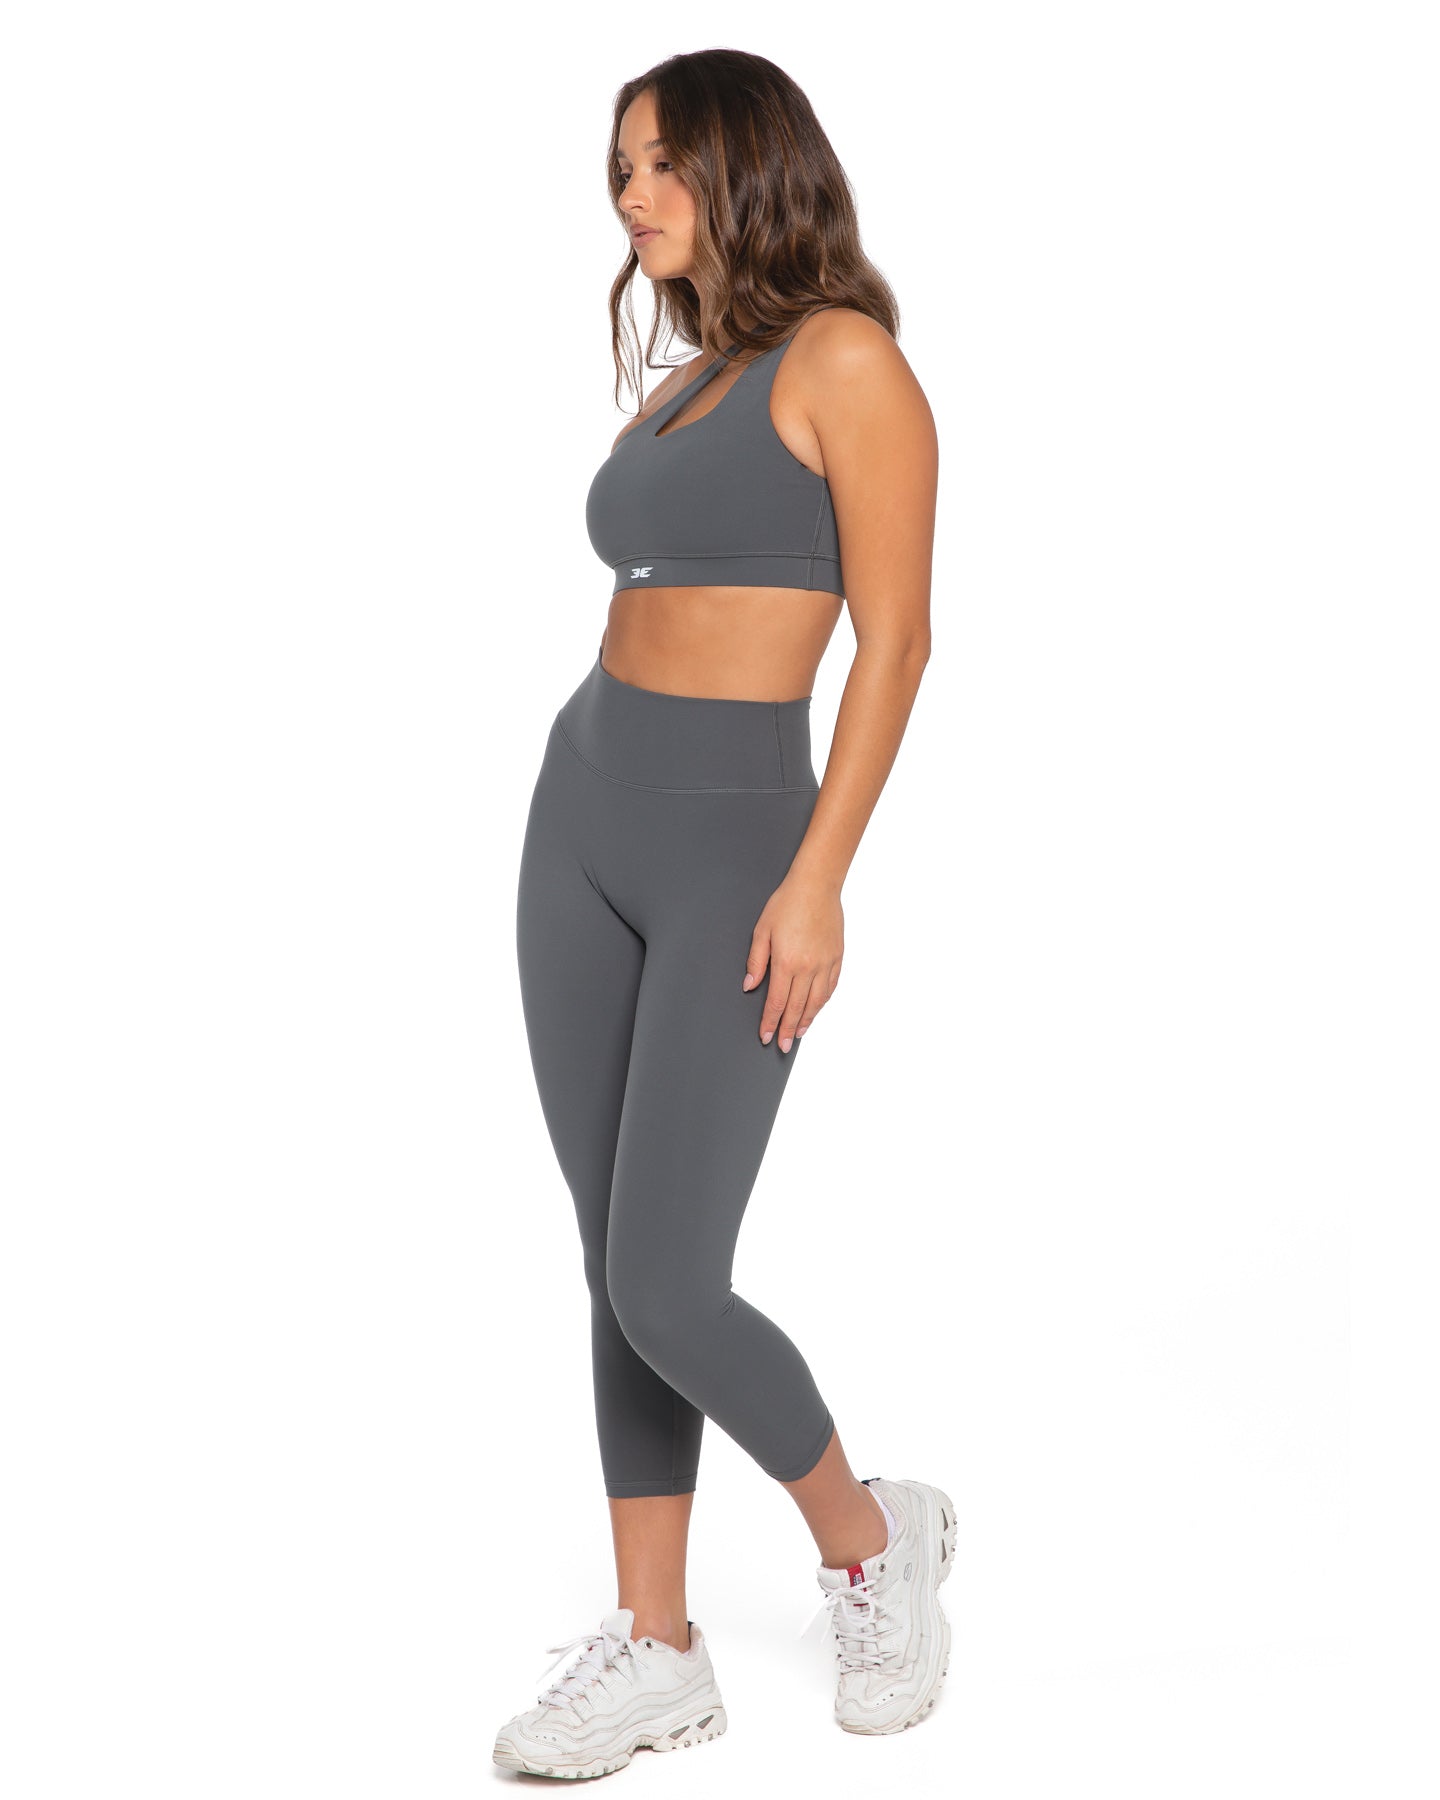 P'tula Review  Leggings and Sports Bra 